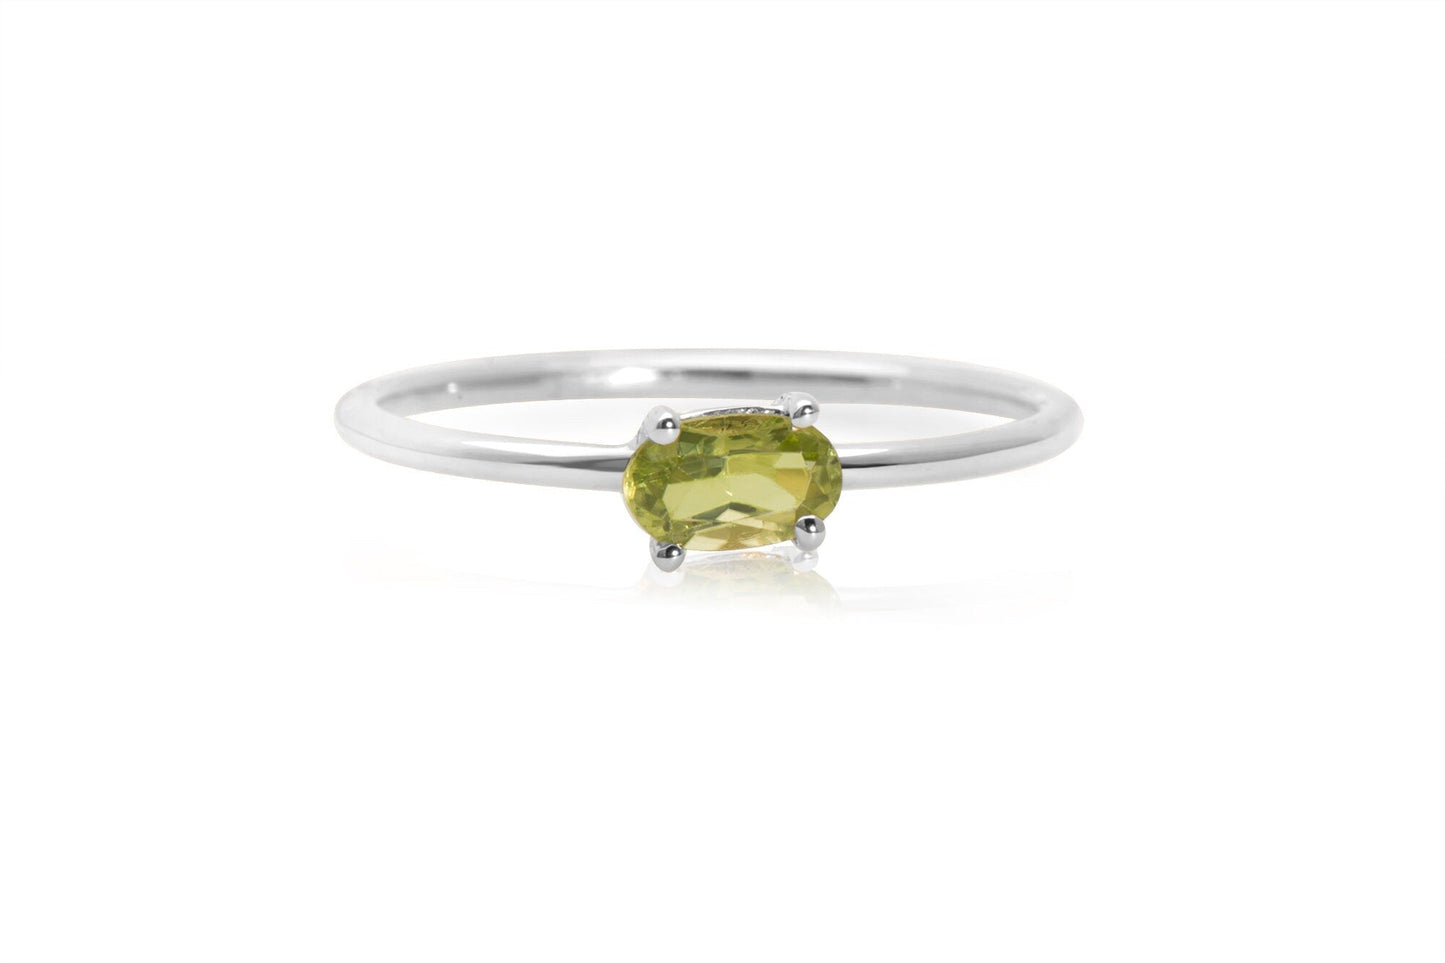 14k Solid Gold Oval Shape Green Peridot Gemstone Stacking ring